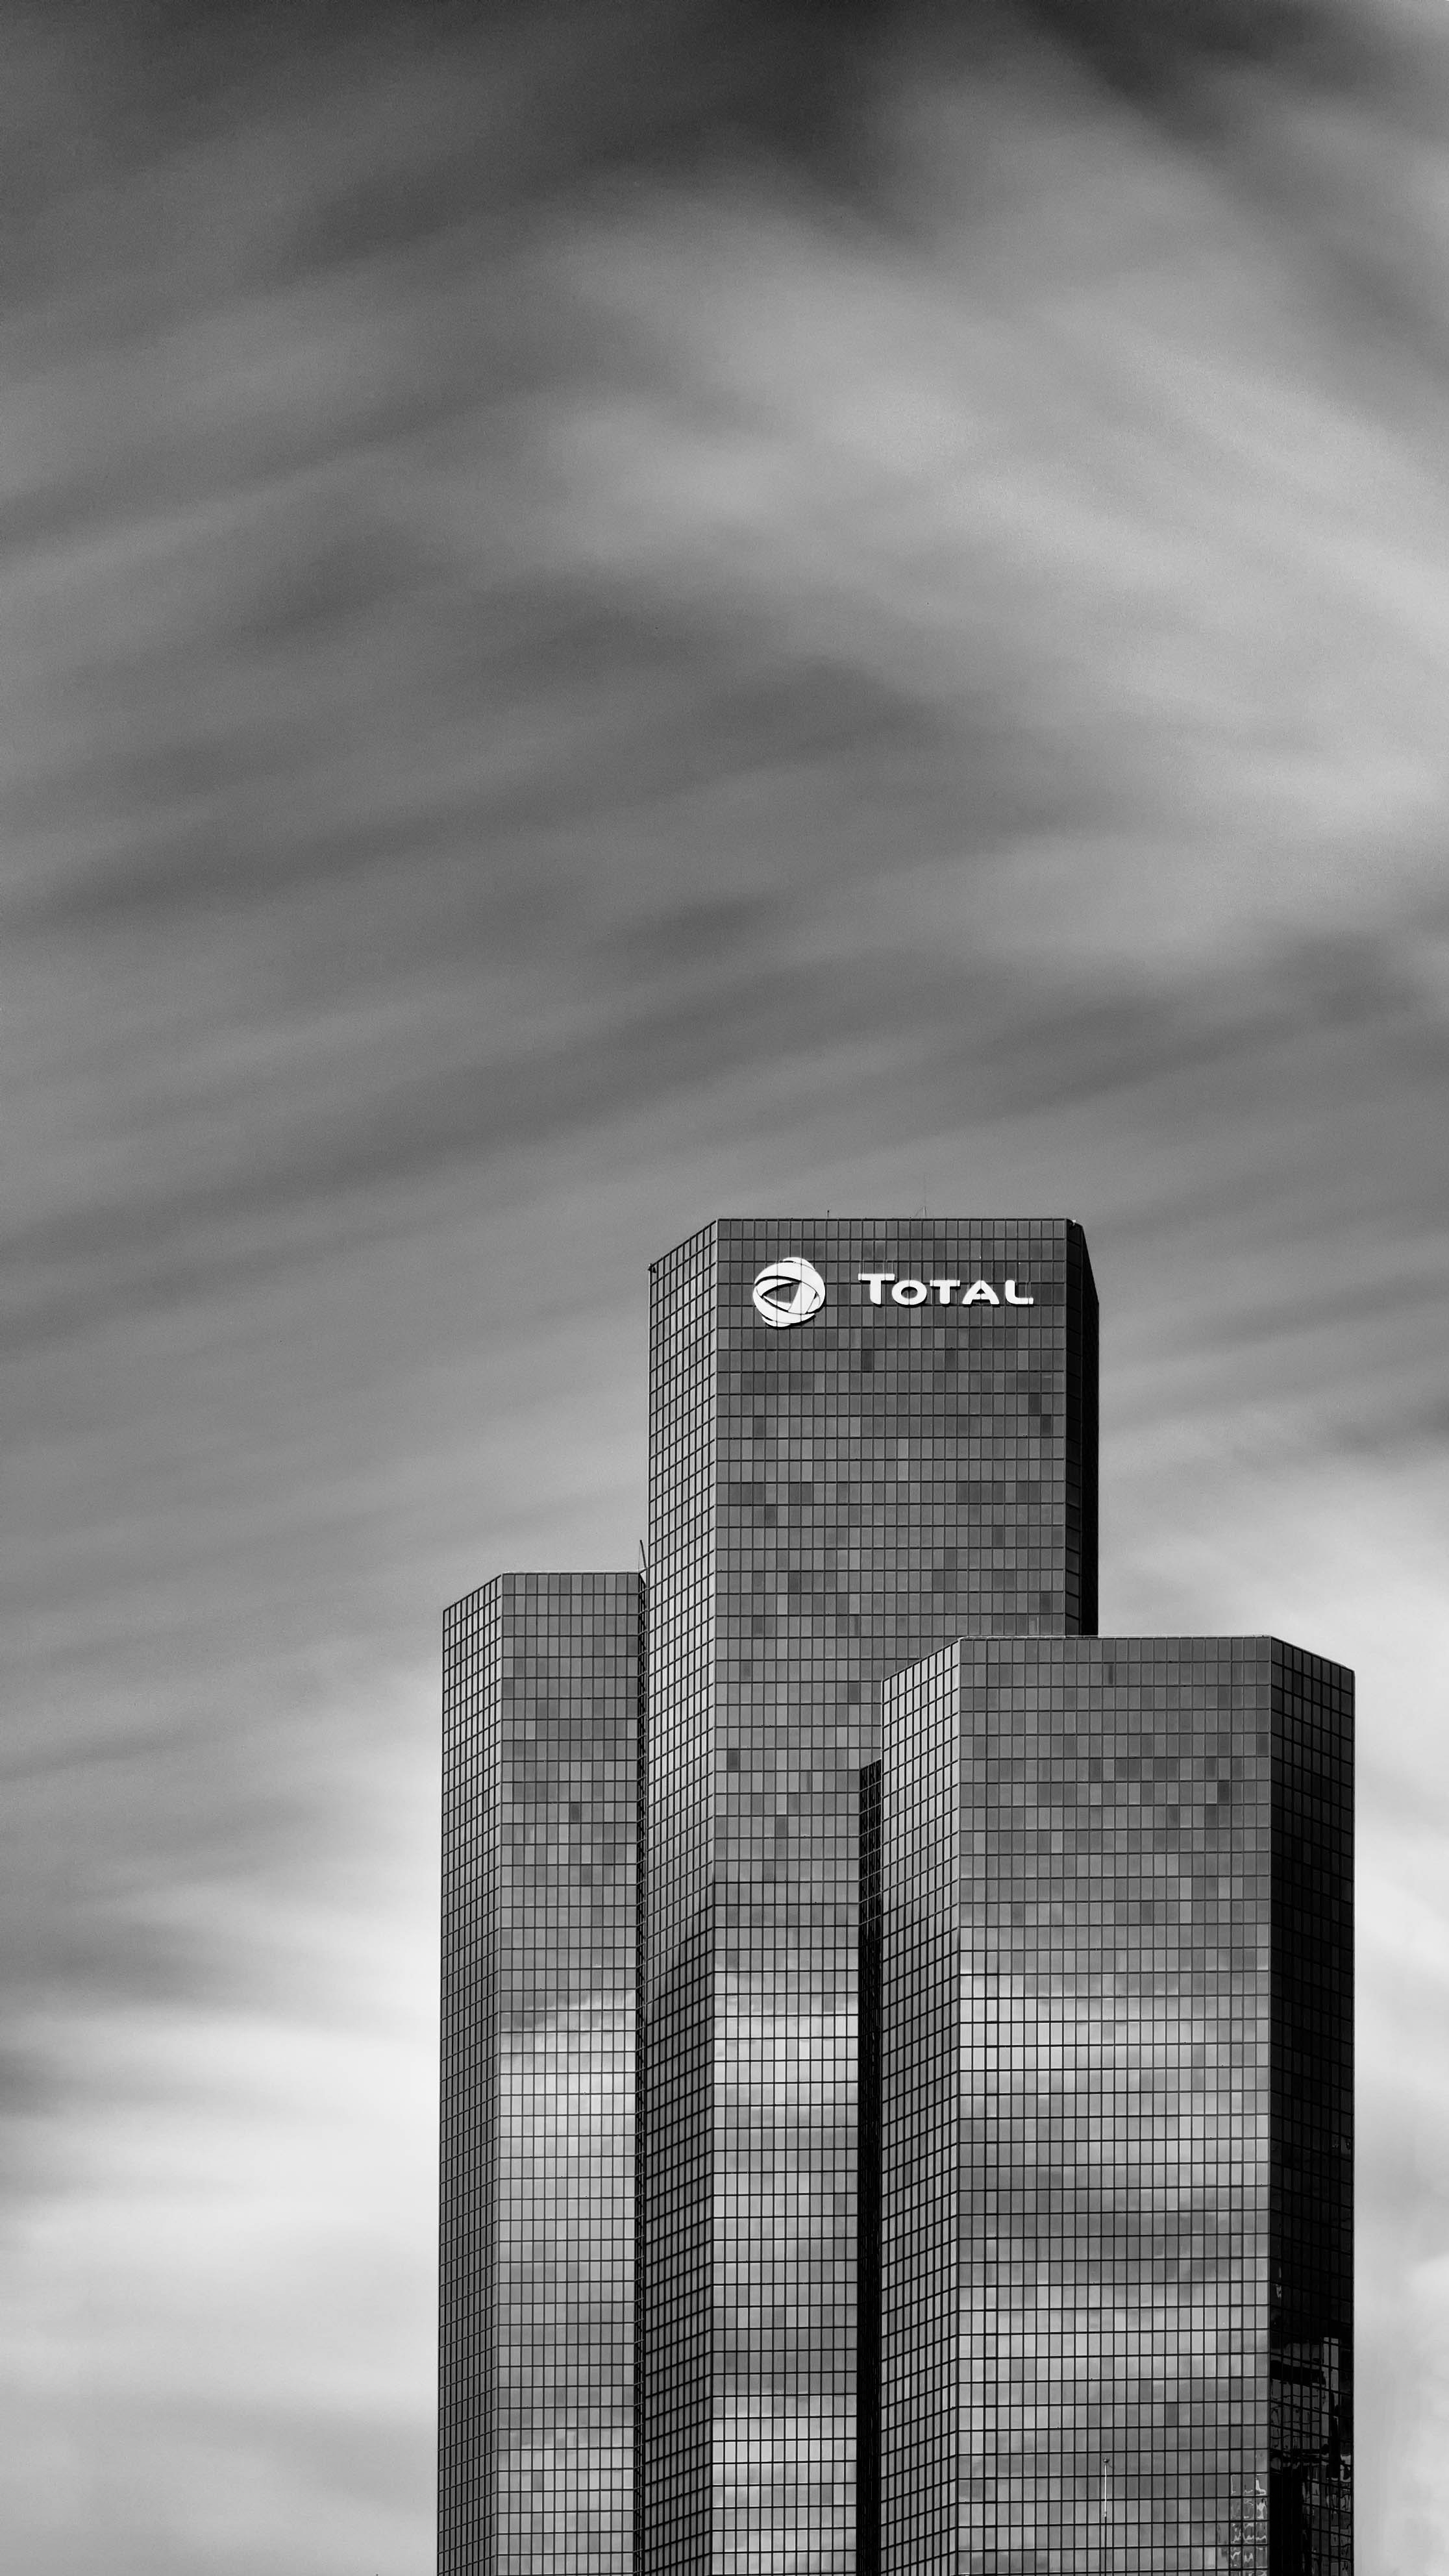 Total building greyscale photo